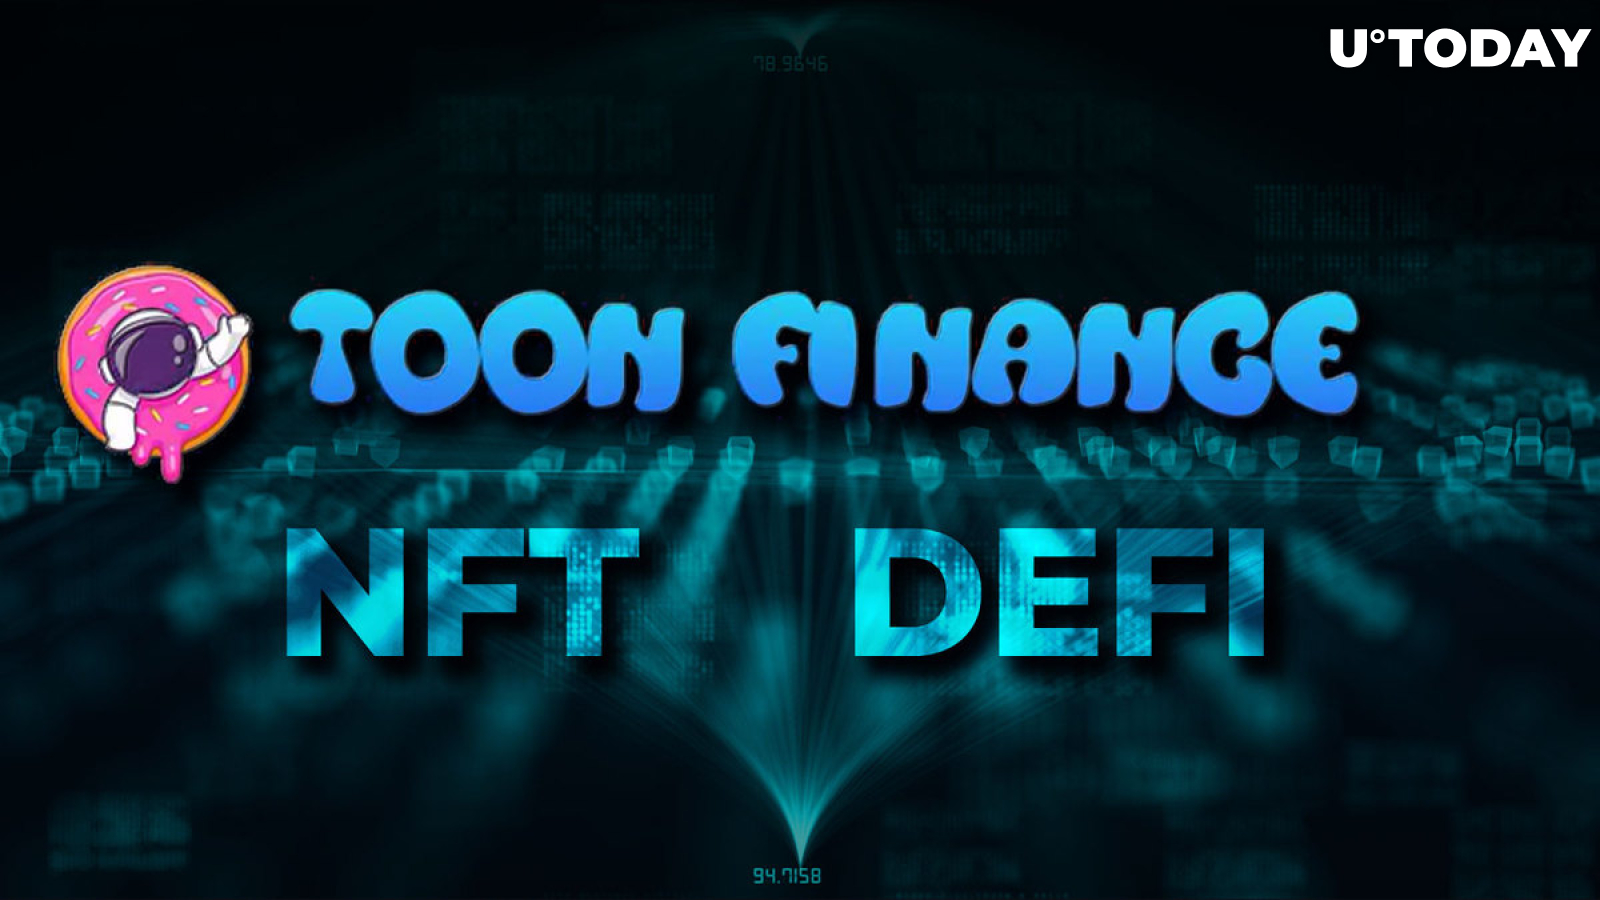 Toon Finance Launches Multi-Product DeFi and NFT Ecosystem